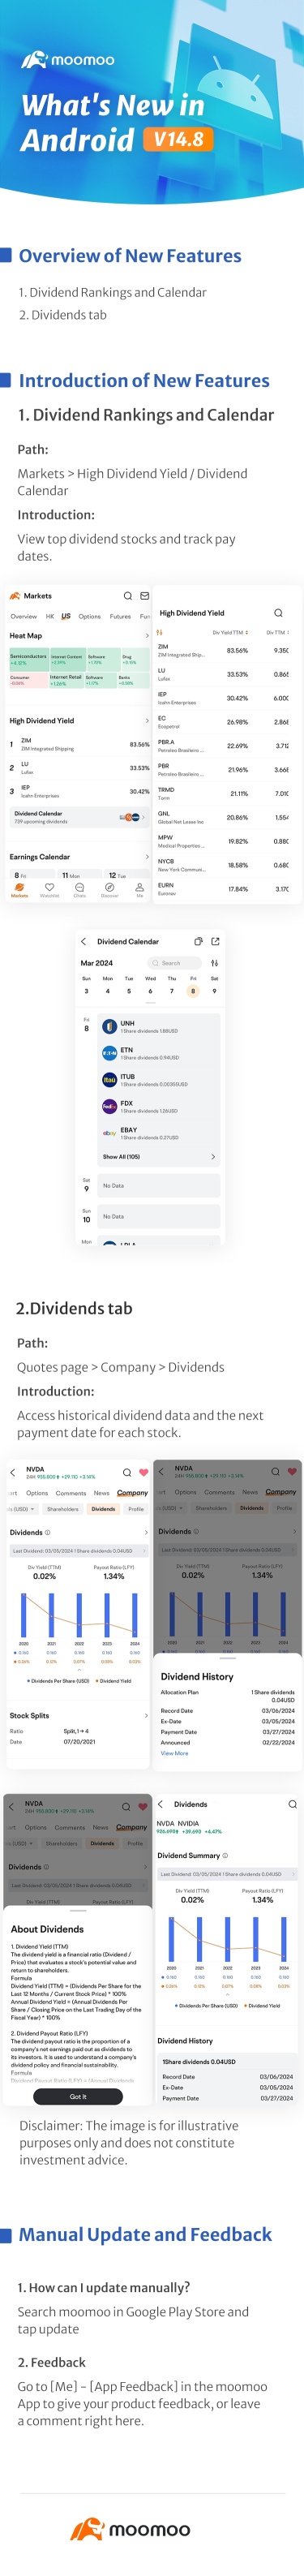 What's New: Dividend Rankings, Dividend Calendar and Dividends tab are available in Android v14.8